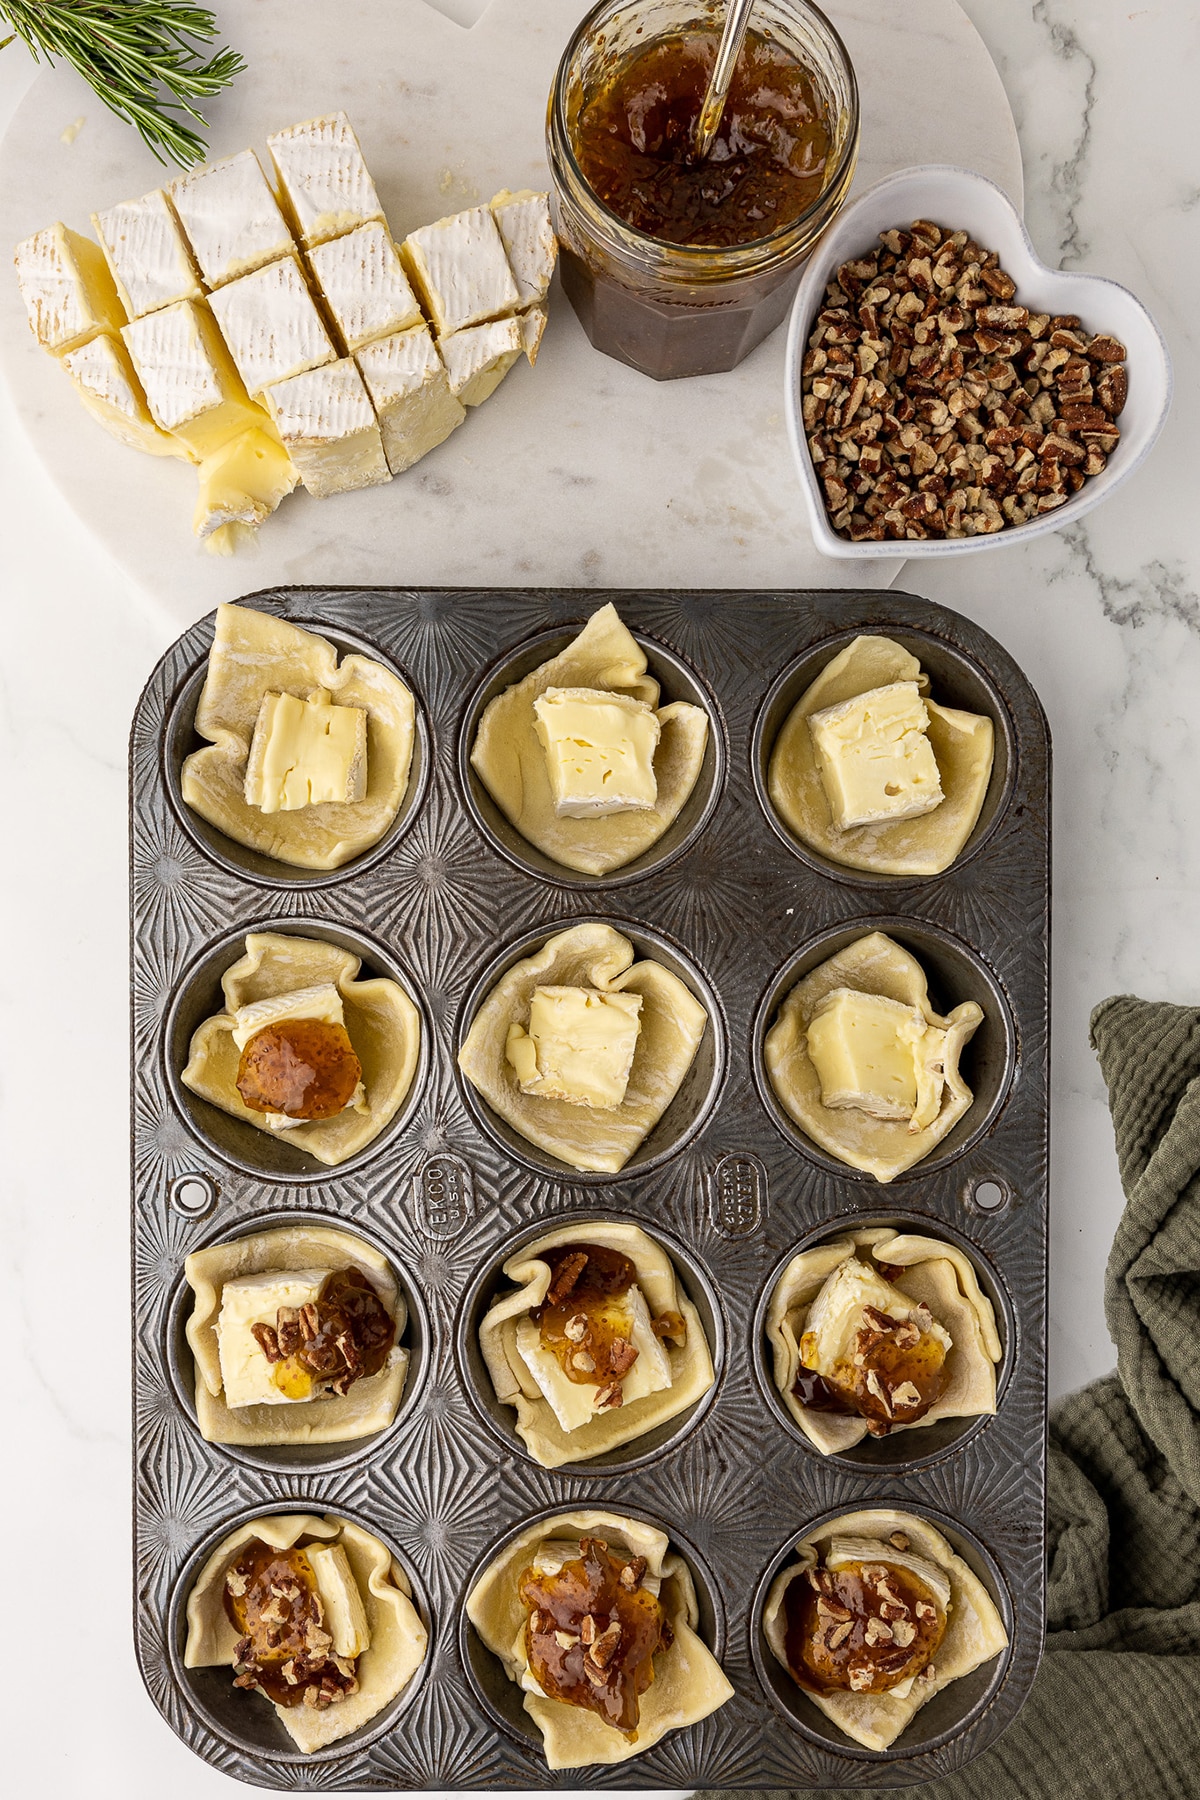 antique muffin pan filled with unbaked brie bites, topped with fig jam and walnuts